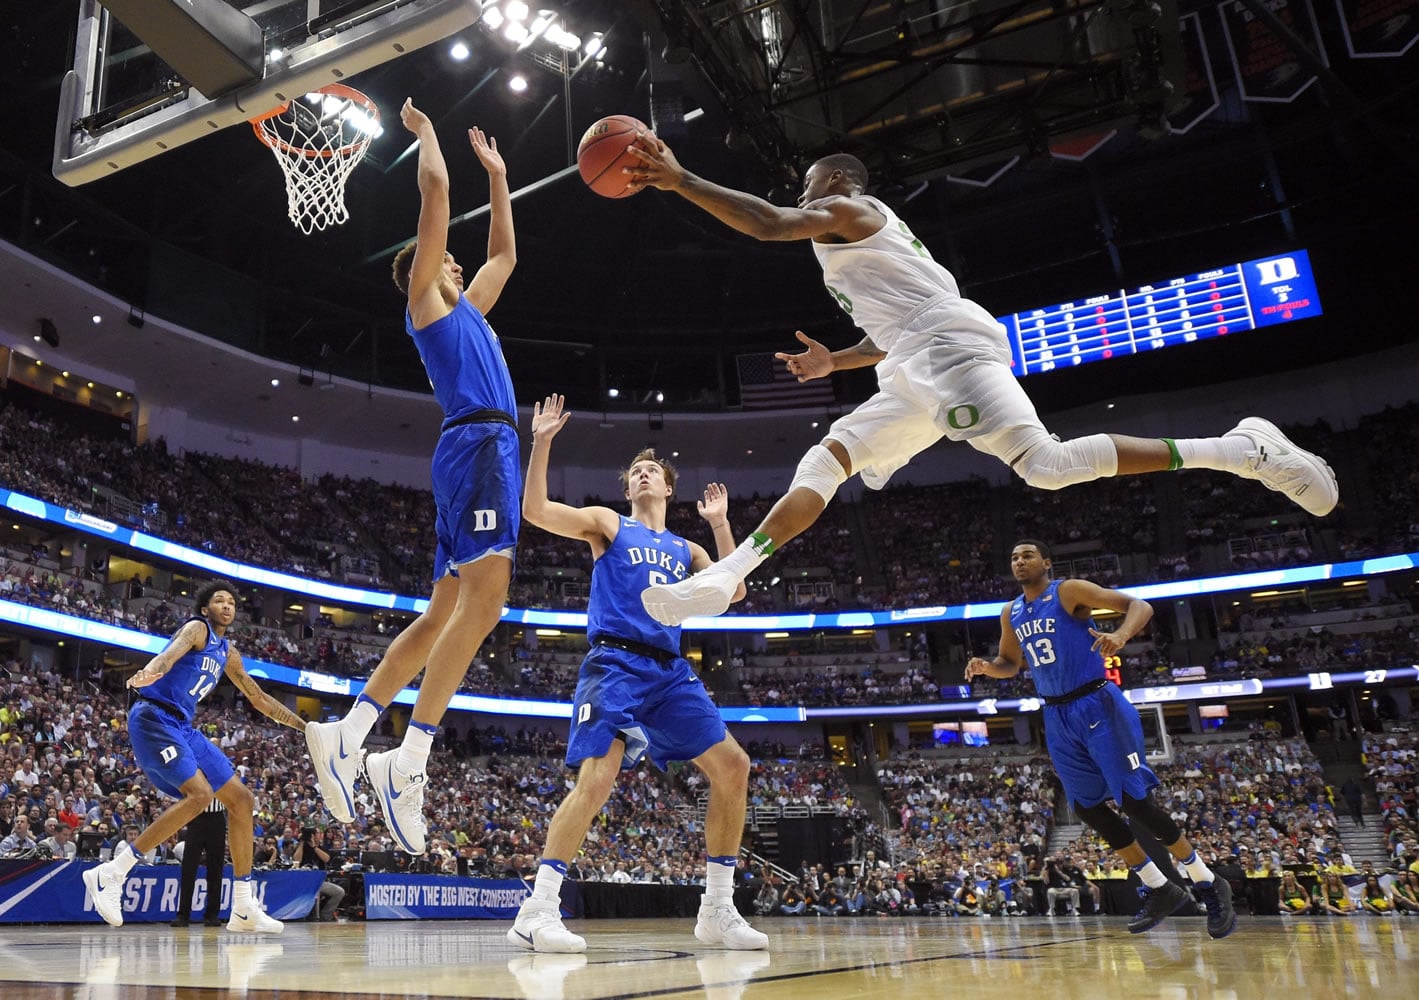 Oregon's Elgin Cook passes the ball as Duke forward Chase Jeter defends during the first half of an NCAA college basketball game in the regional semifinals of the NCAA Tournament, Thursday, March 24, 2016, in Anaheim, Calif. (AP Photo/Mark J.